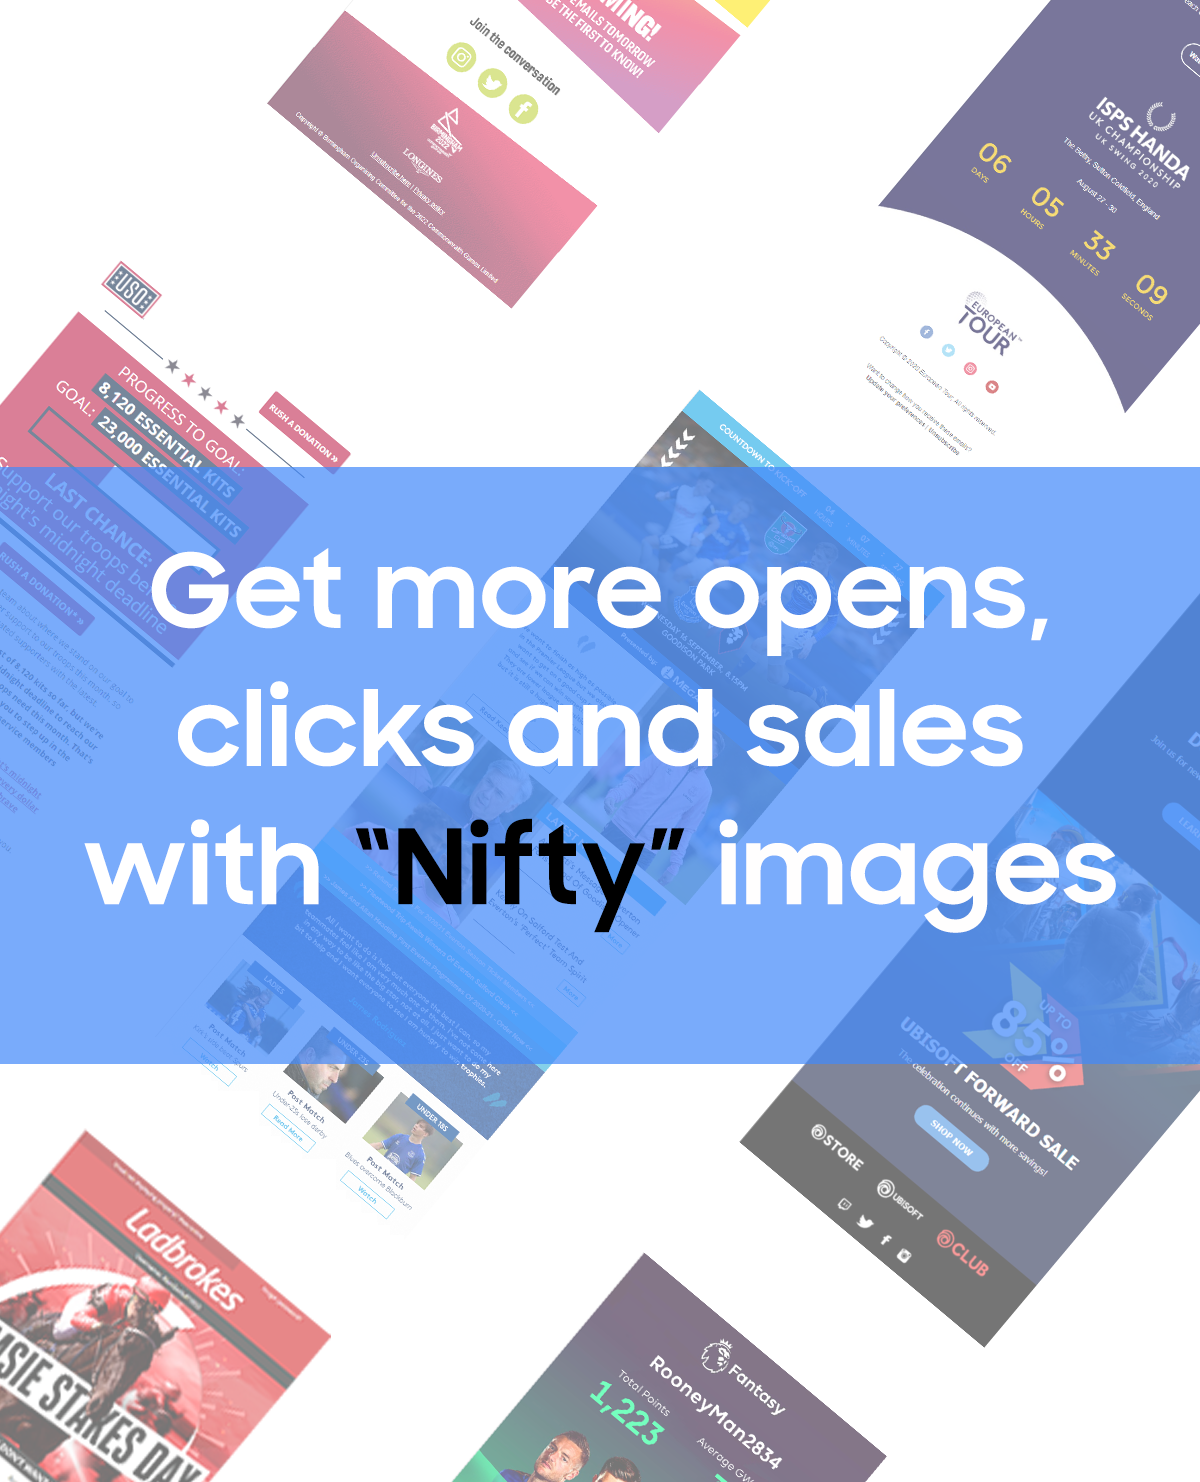 Get more Opens, Clicks and Sales with "Nifty" images.